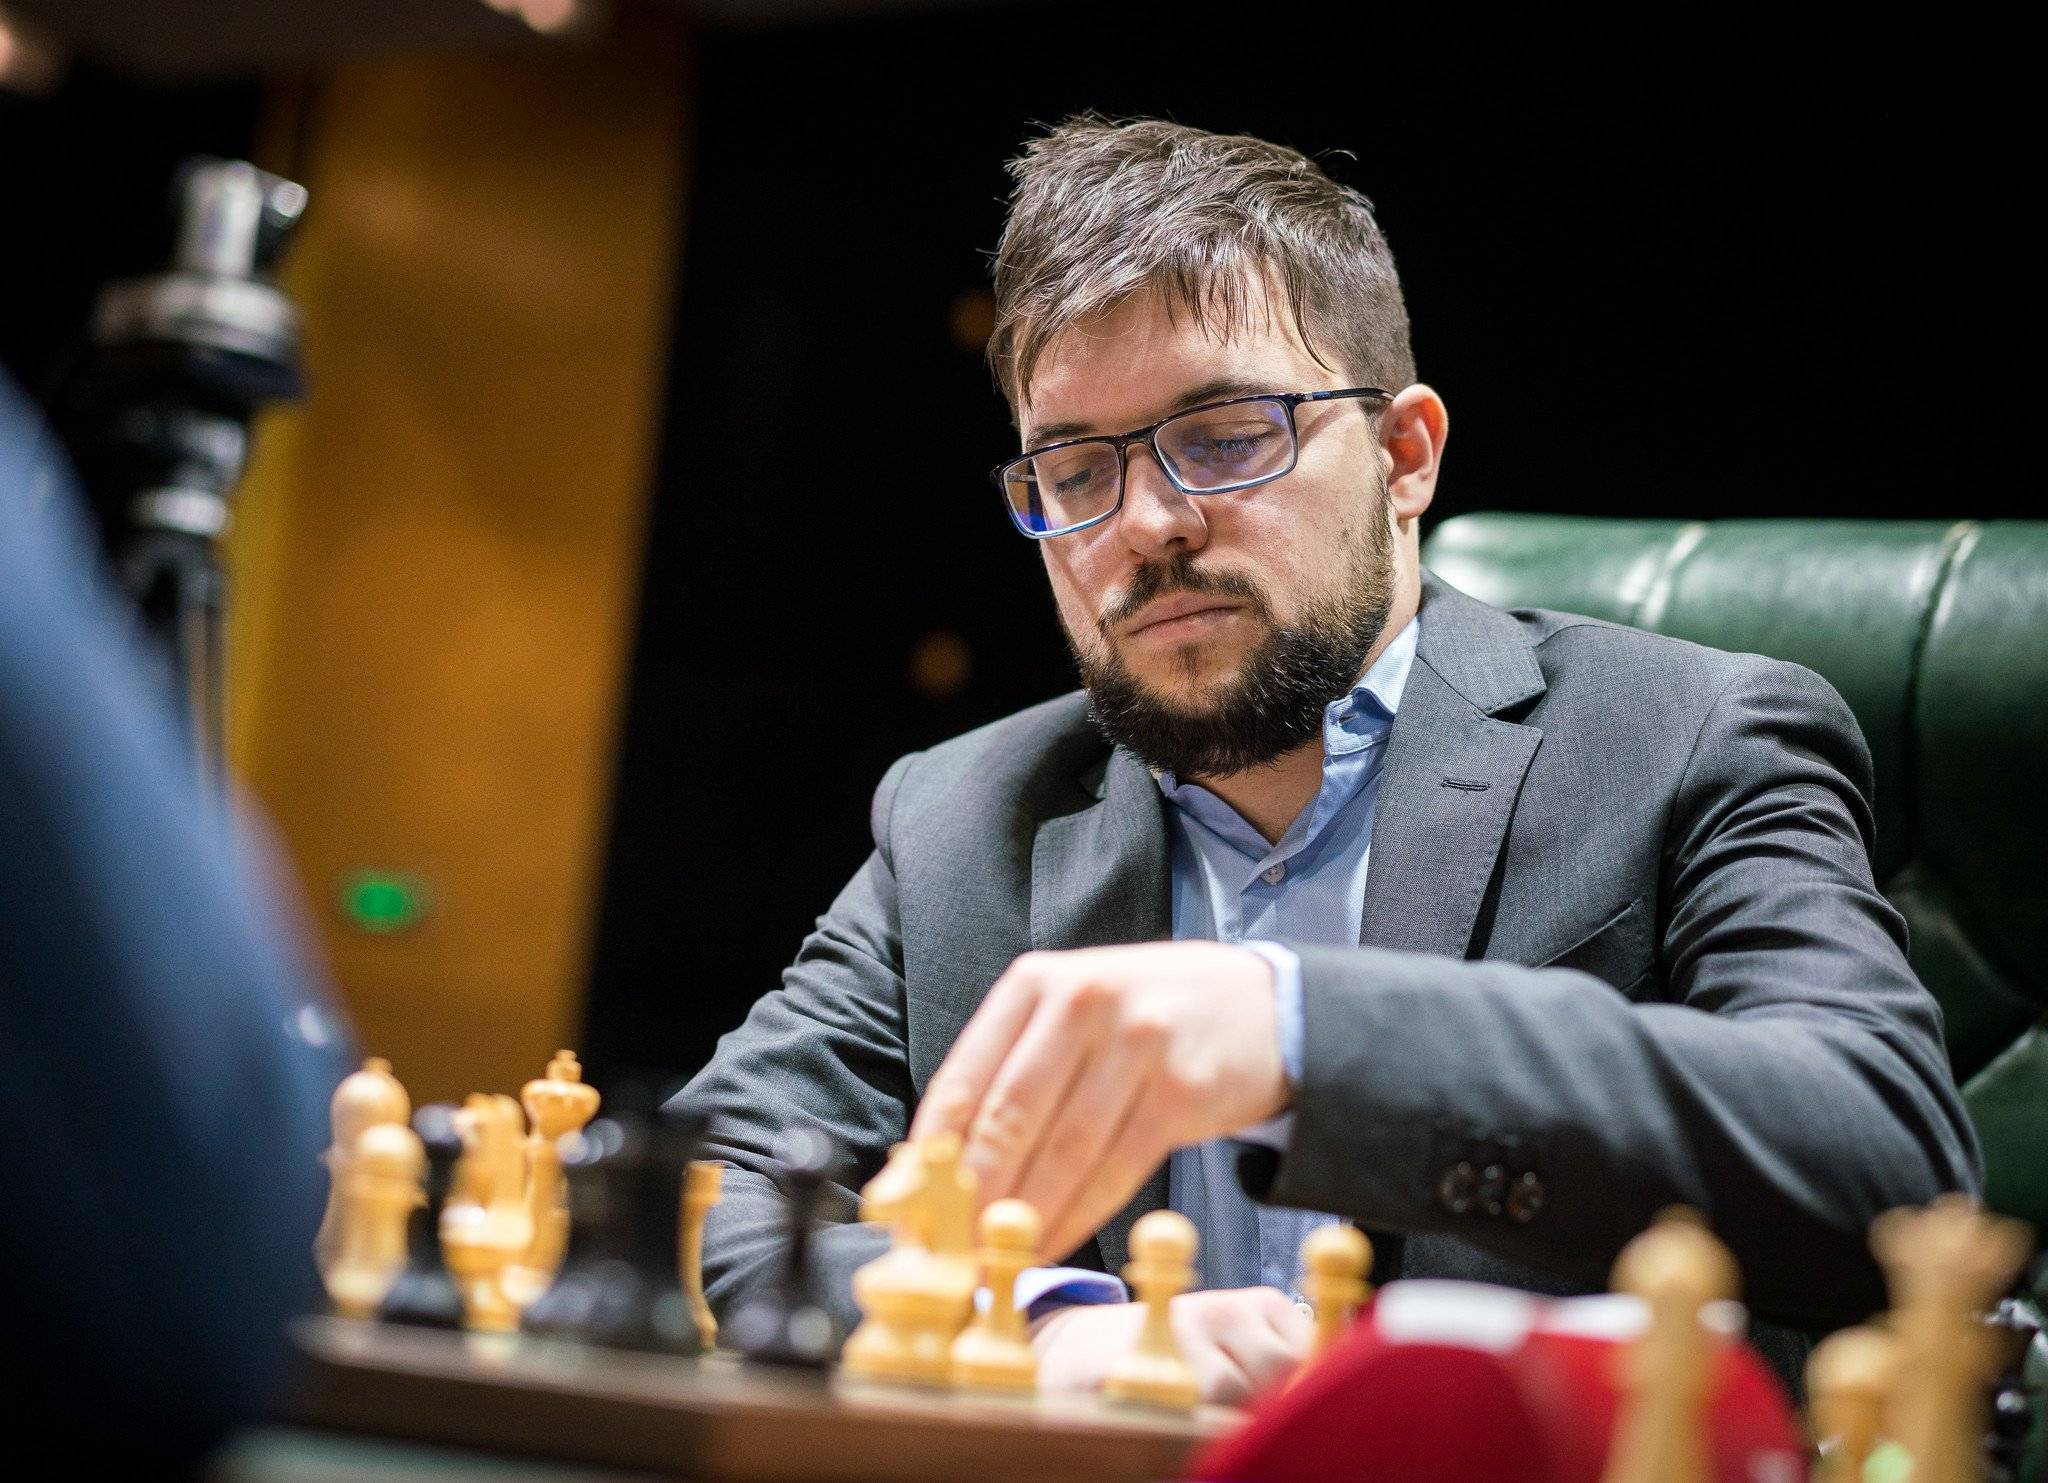 Round four at the FIDE Candidates Tournament saw four draws ©FIDE